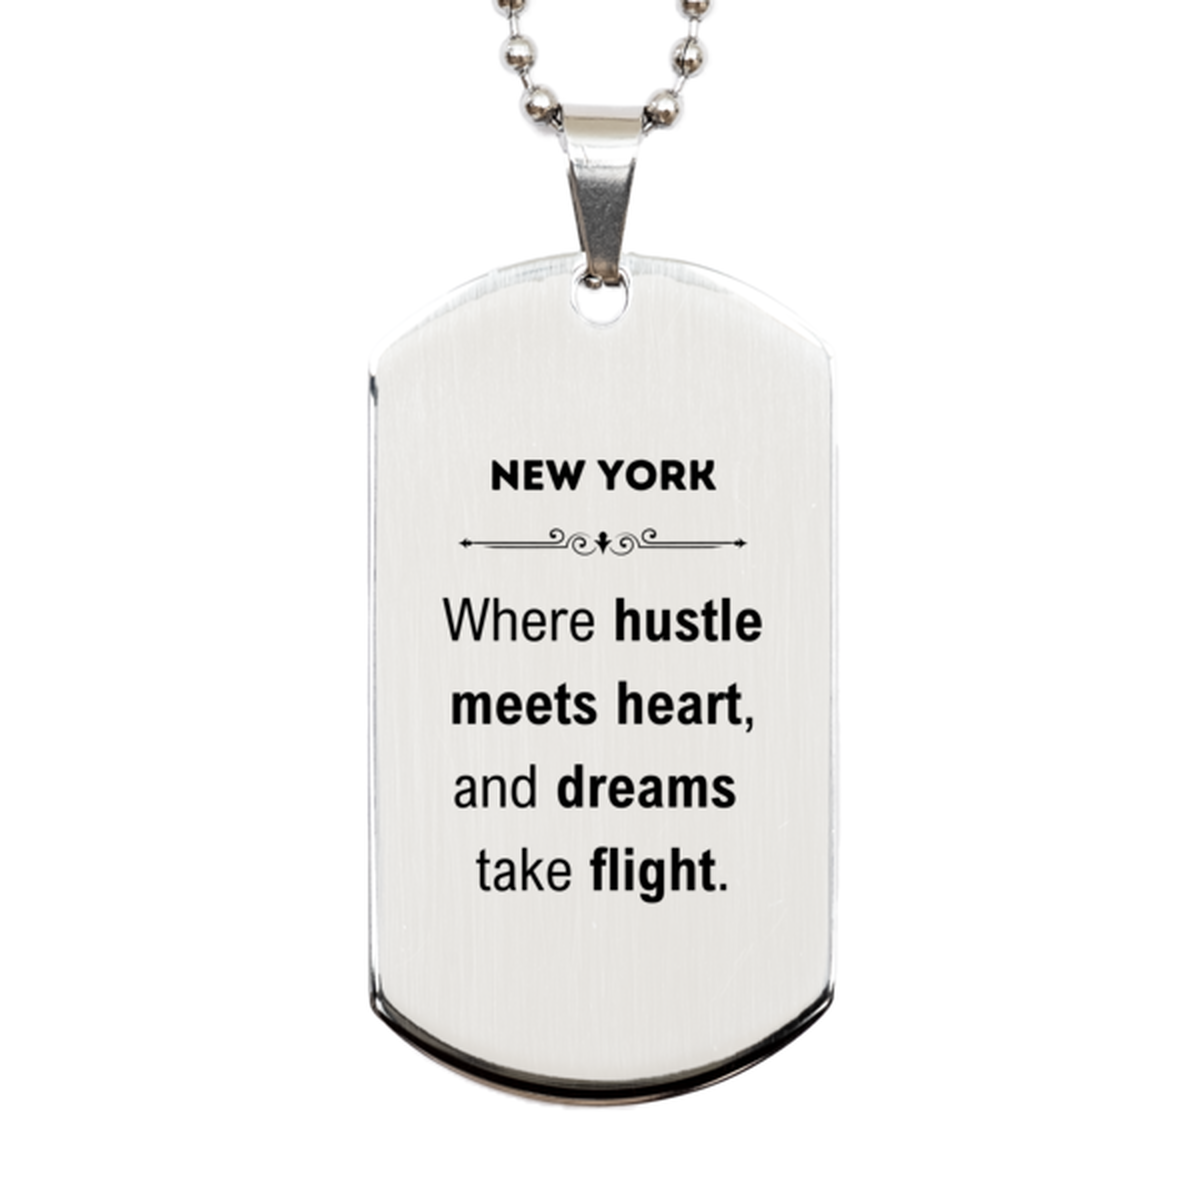 New York: Where hustle meets heart, and dreams take flight, New York Gifts, Proud New York Christmas Birthday New York Silver Dog Tag, New York State People, Men, Women, Friends